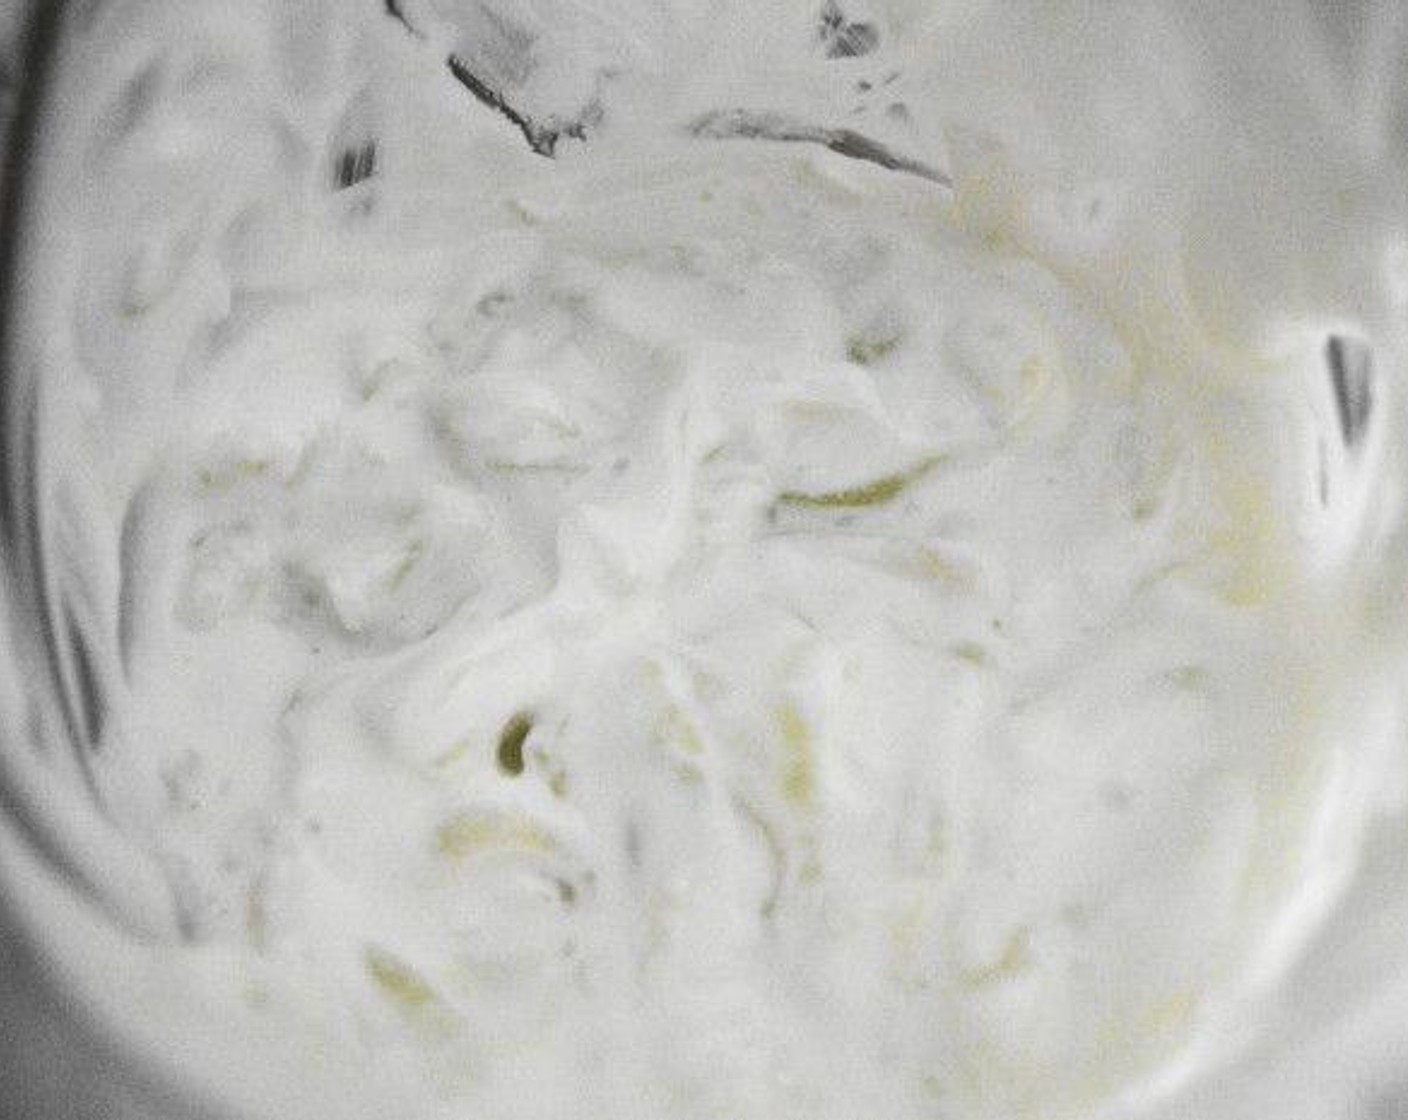 step 5 While the meatballs bake, make the easy yogurt sauce and gather the ingredients for assembly. To make the sauce, simply stir the Greek Yogurt (1 cup), Cucumber (1/2), Lemon (1/2), Olive Oil (1 dash), and Salt (1 pinch) together in a bowl. Set it aside until you need it.